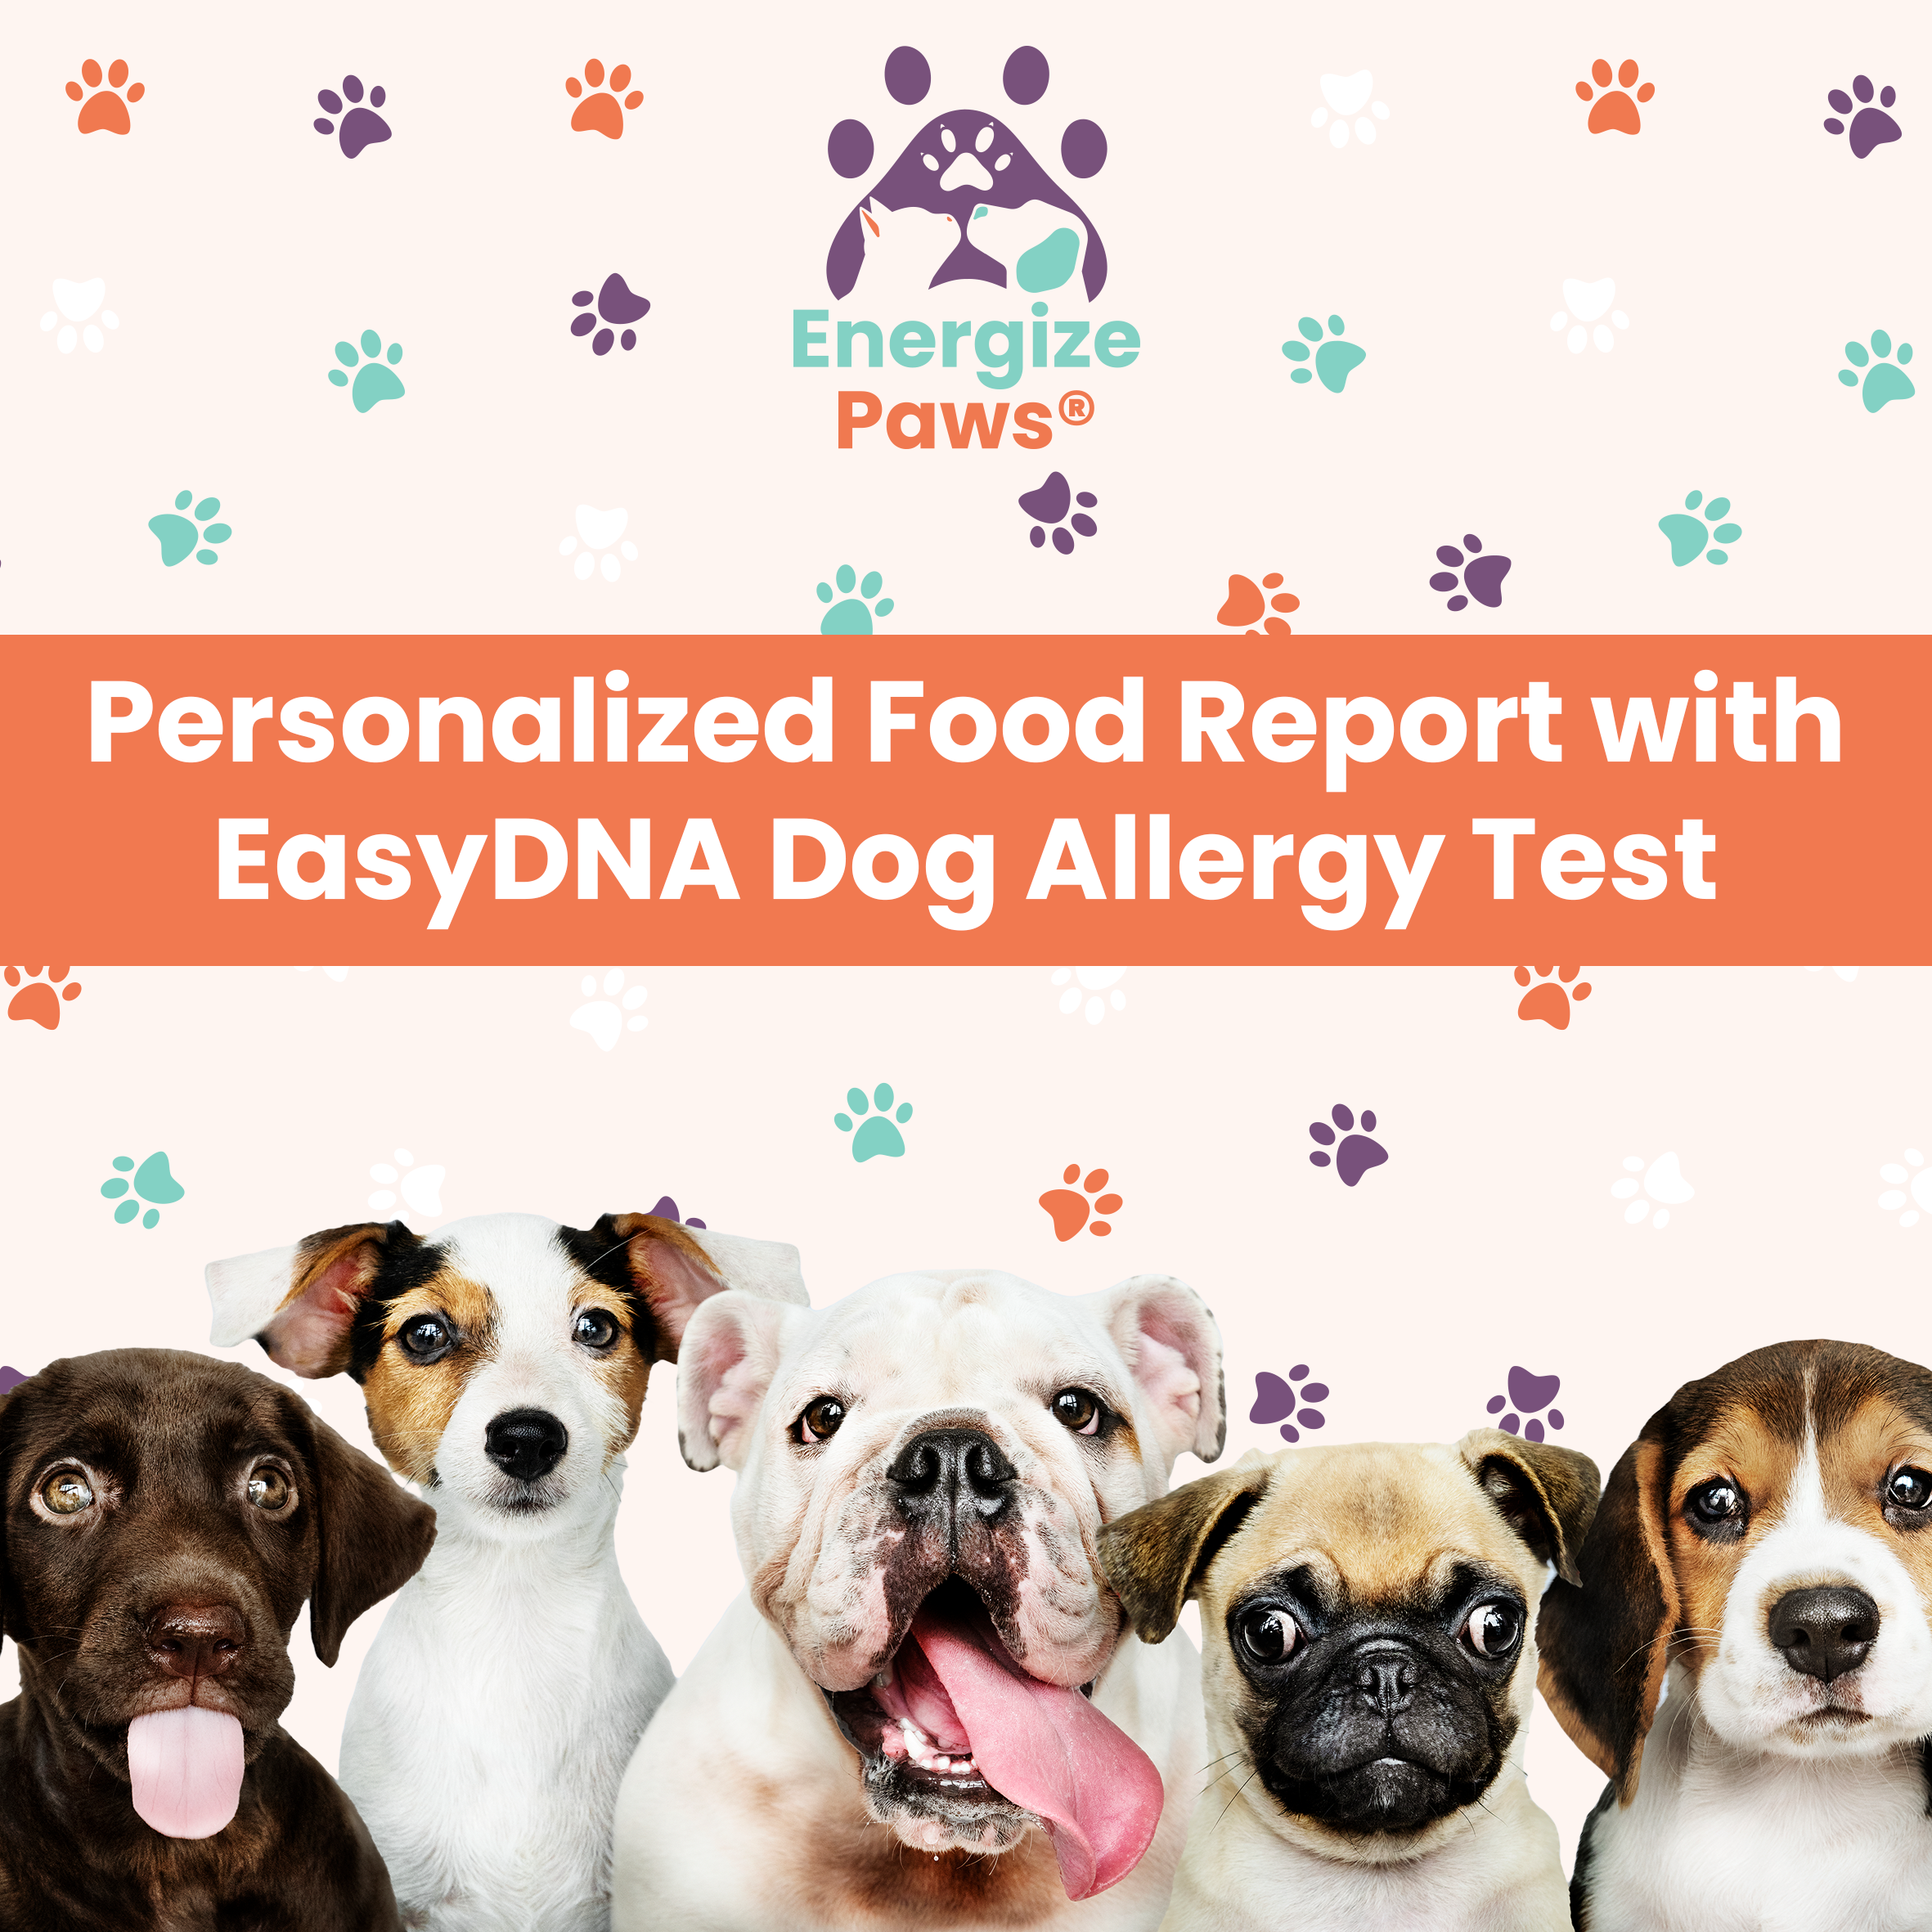 Personalized Food Report With EasyDNA Allergy Test